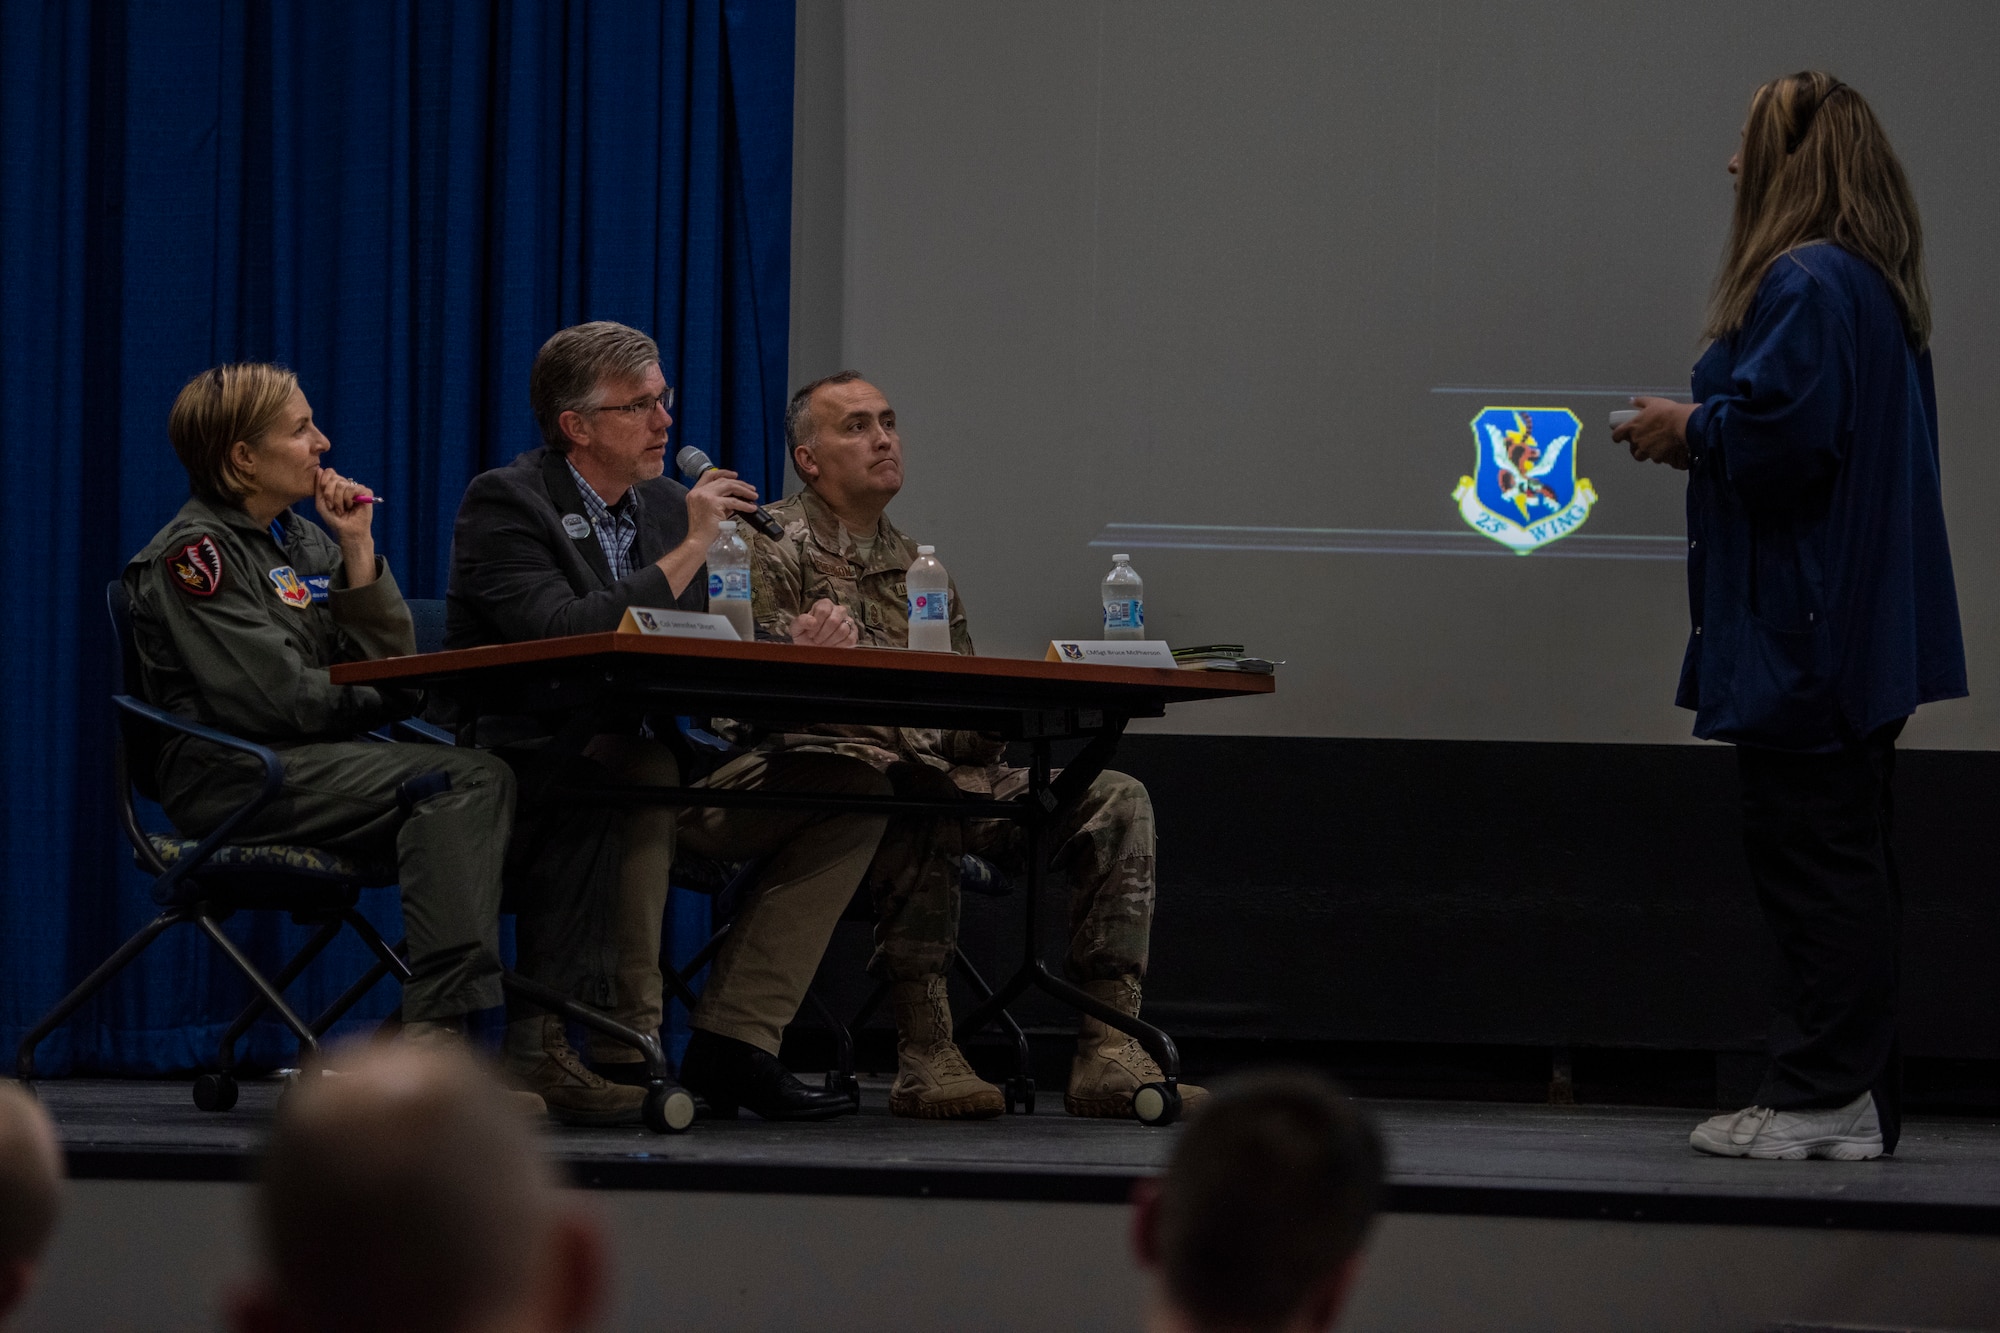 A contestant pitches an idea to the judges during the second annual Moody Spark Tank competition, May, 3, 2019, at Moody Air Force Base, Ga. Teams were given five minutes to present their ideas, followed by four minutes of questions from the judges and culminating in a final decision round to announce the winners. (U.S. Air Force photo by Airman 1st Class Joseph P. Leveille)